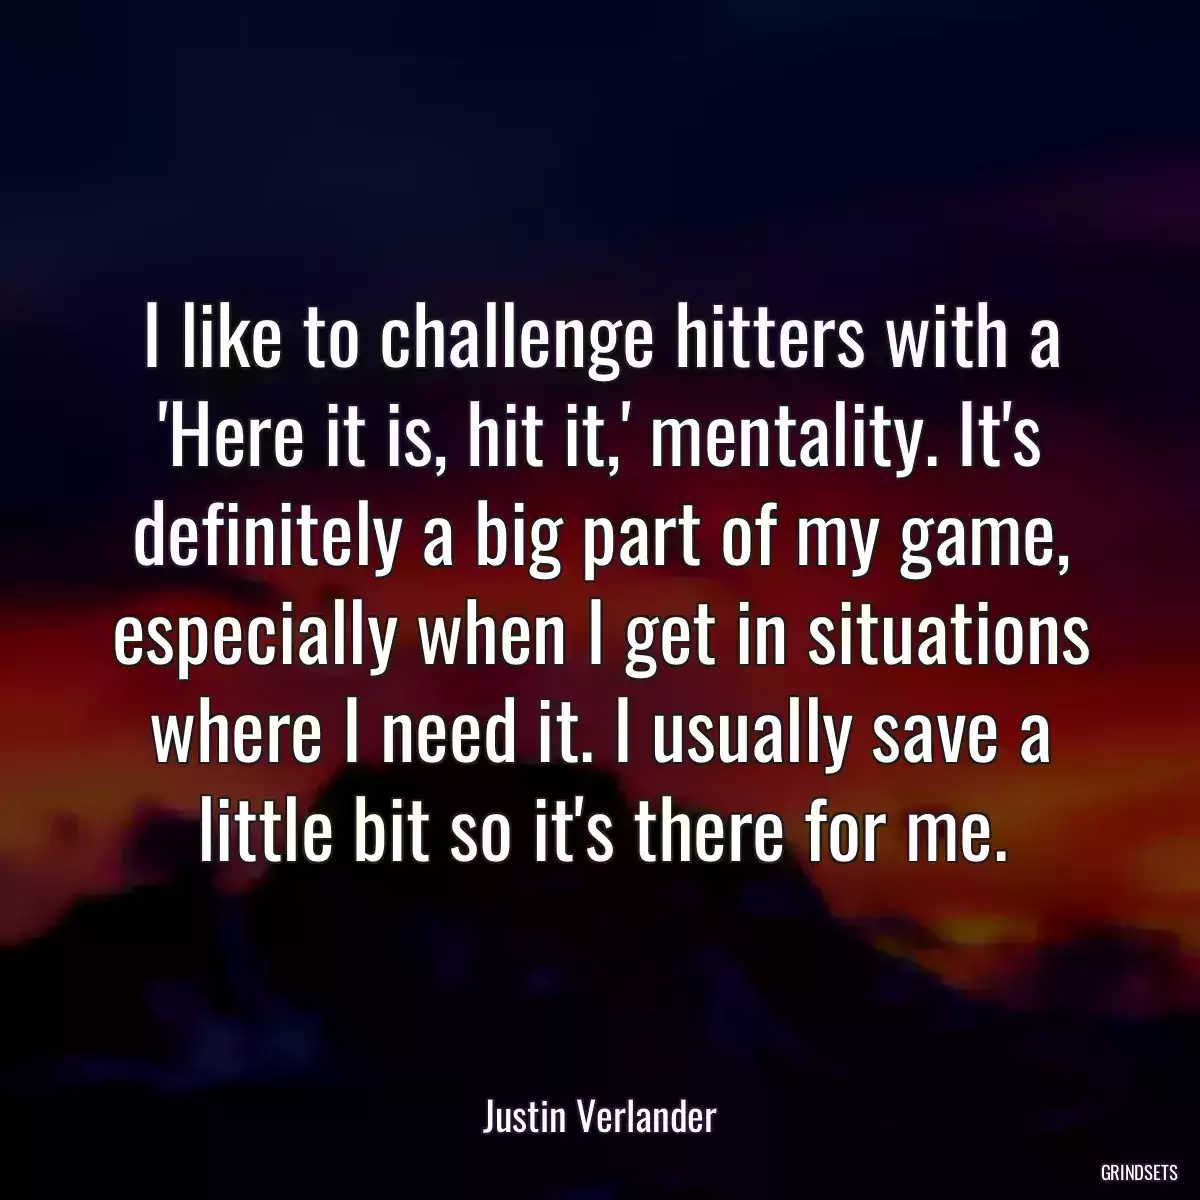 I like to challenge hitters with a \'Here it is, hit it,\' mentality. It\'s definitely a big part of my game, especially when I get in situations where I need it. I usually save a little bit so it\'s there for me.